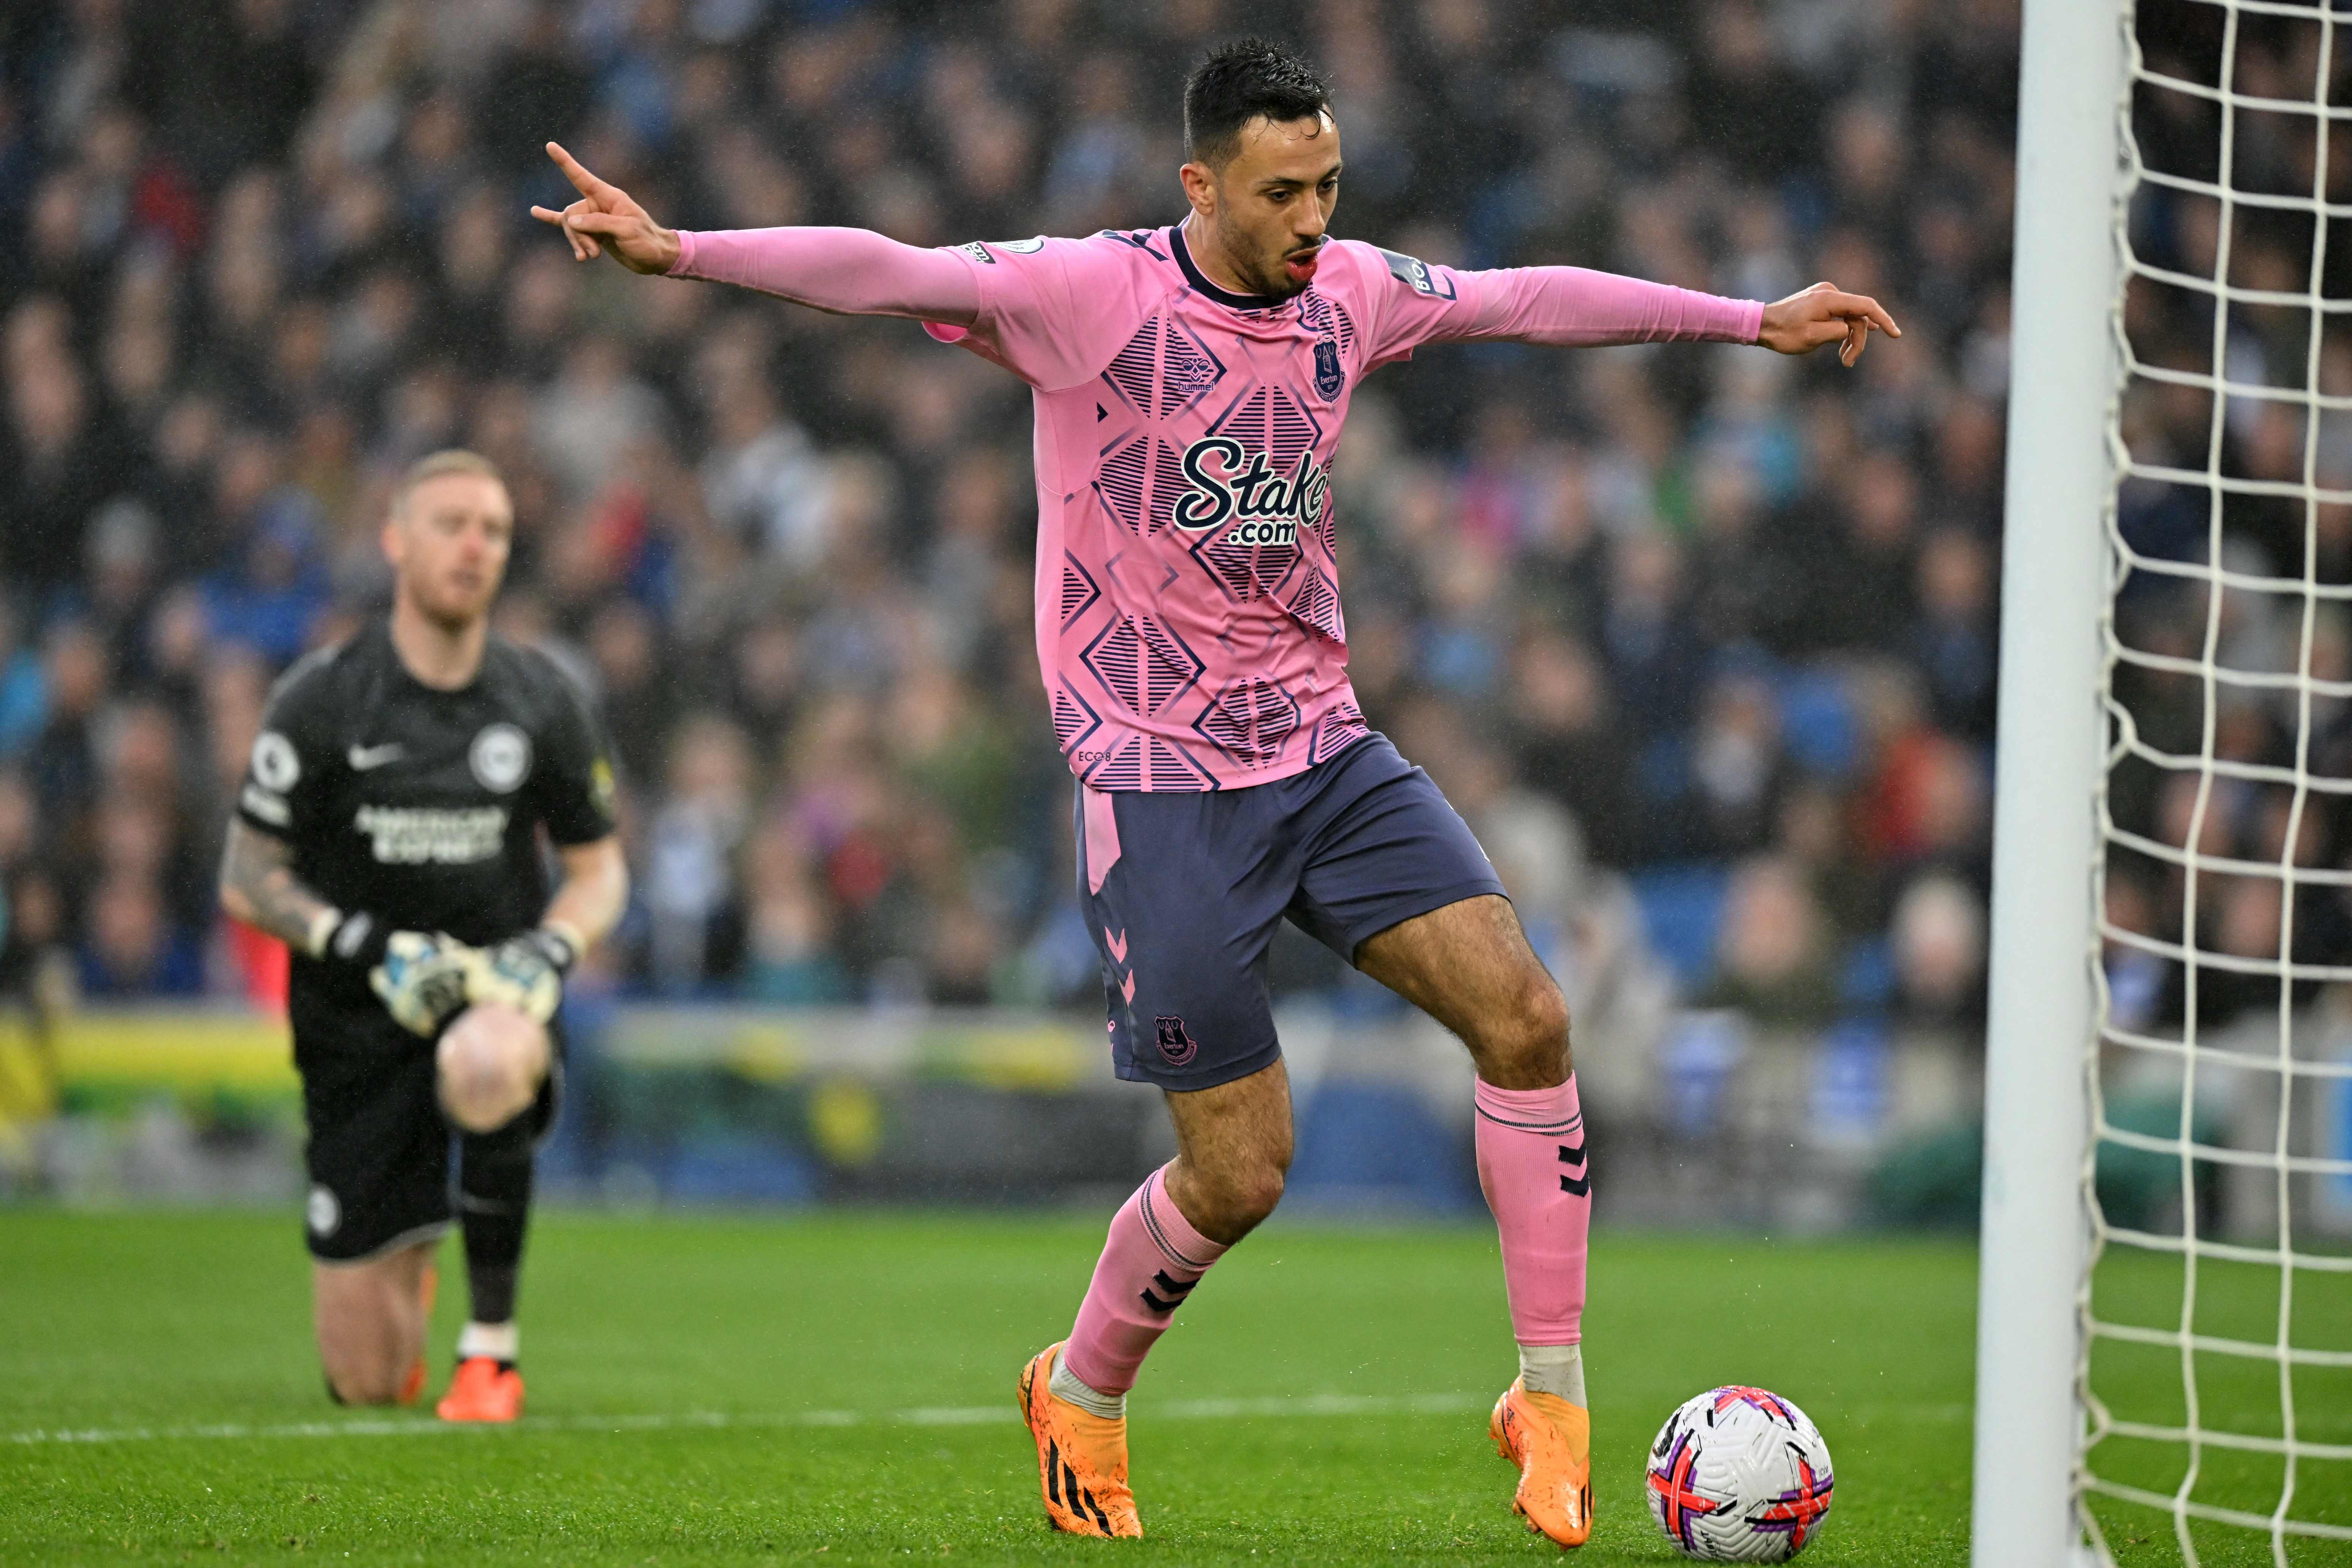 Dwight McNeil’s brilliant performance gives Everton hope of avoiding the drop